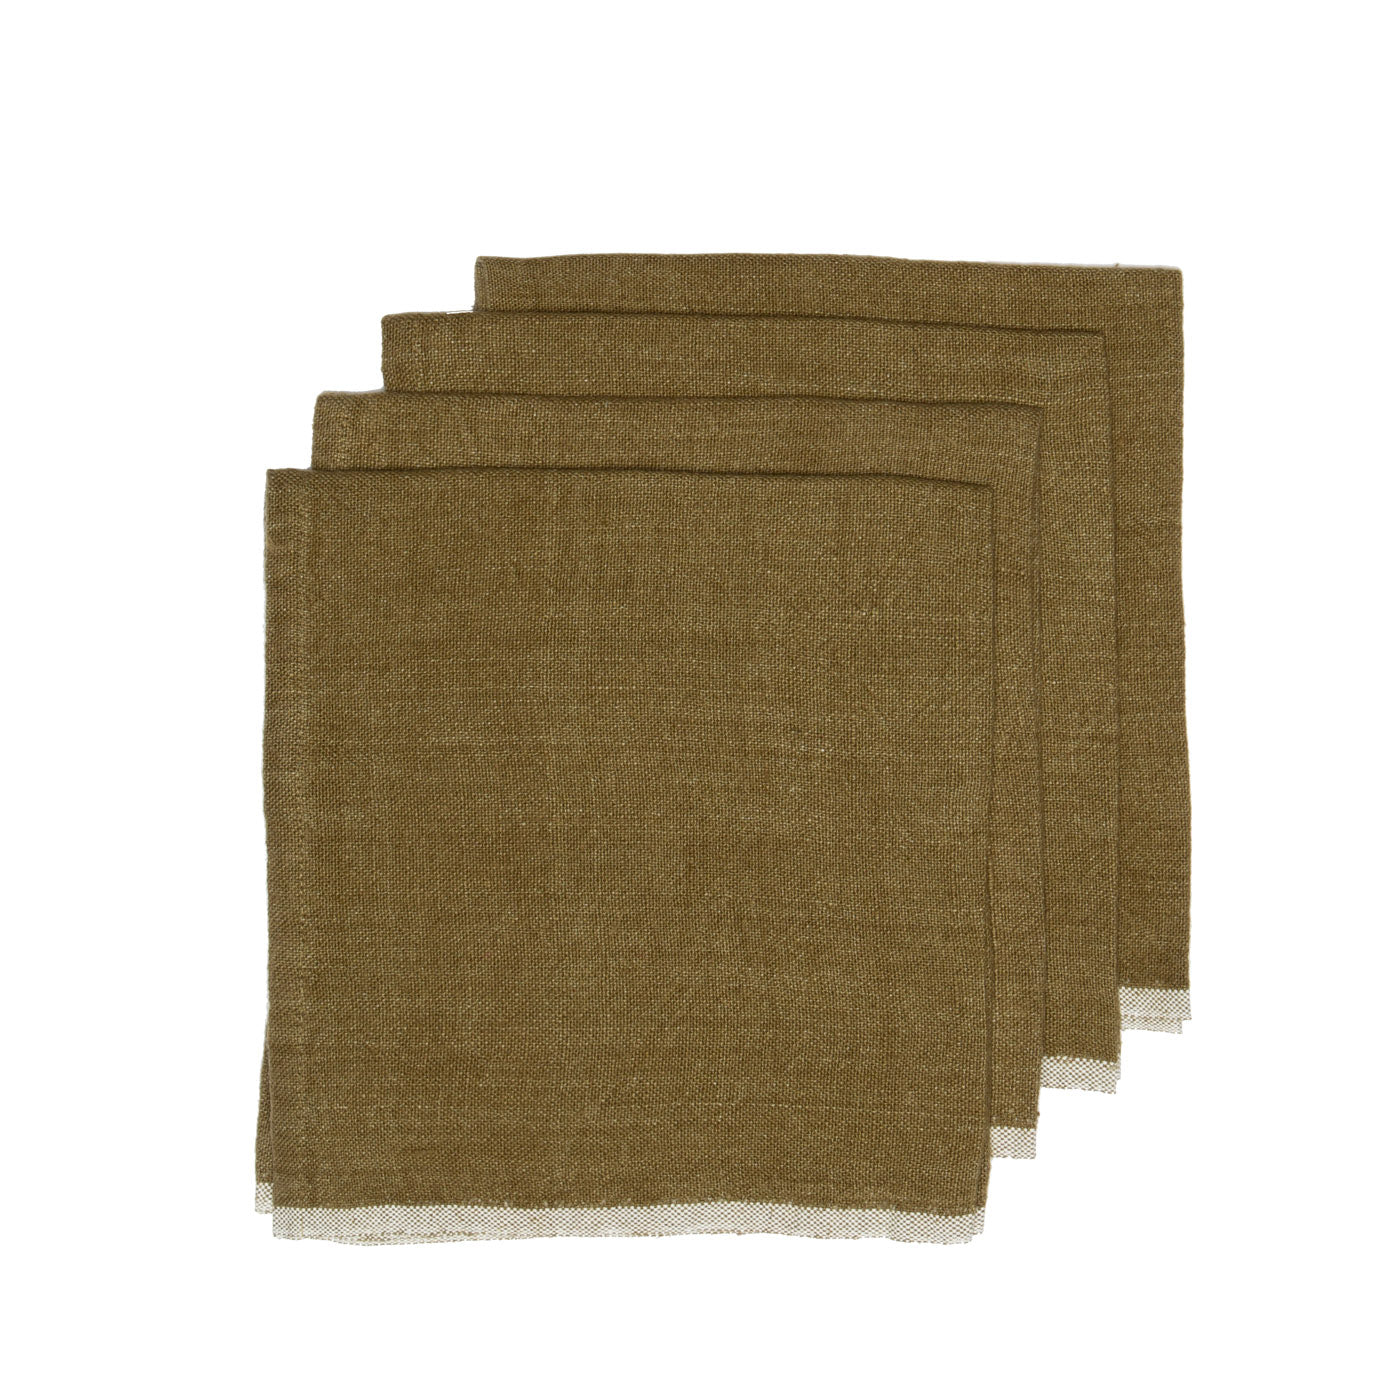 Chunky Linen Forest Green Napkins, Set of 4